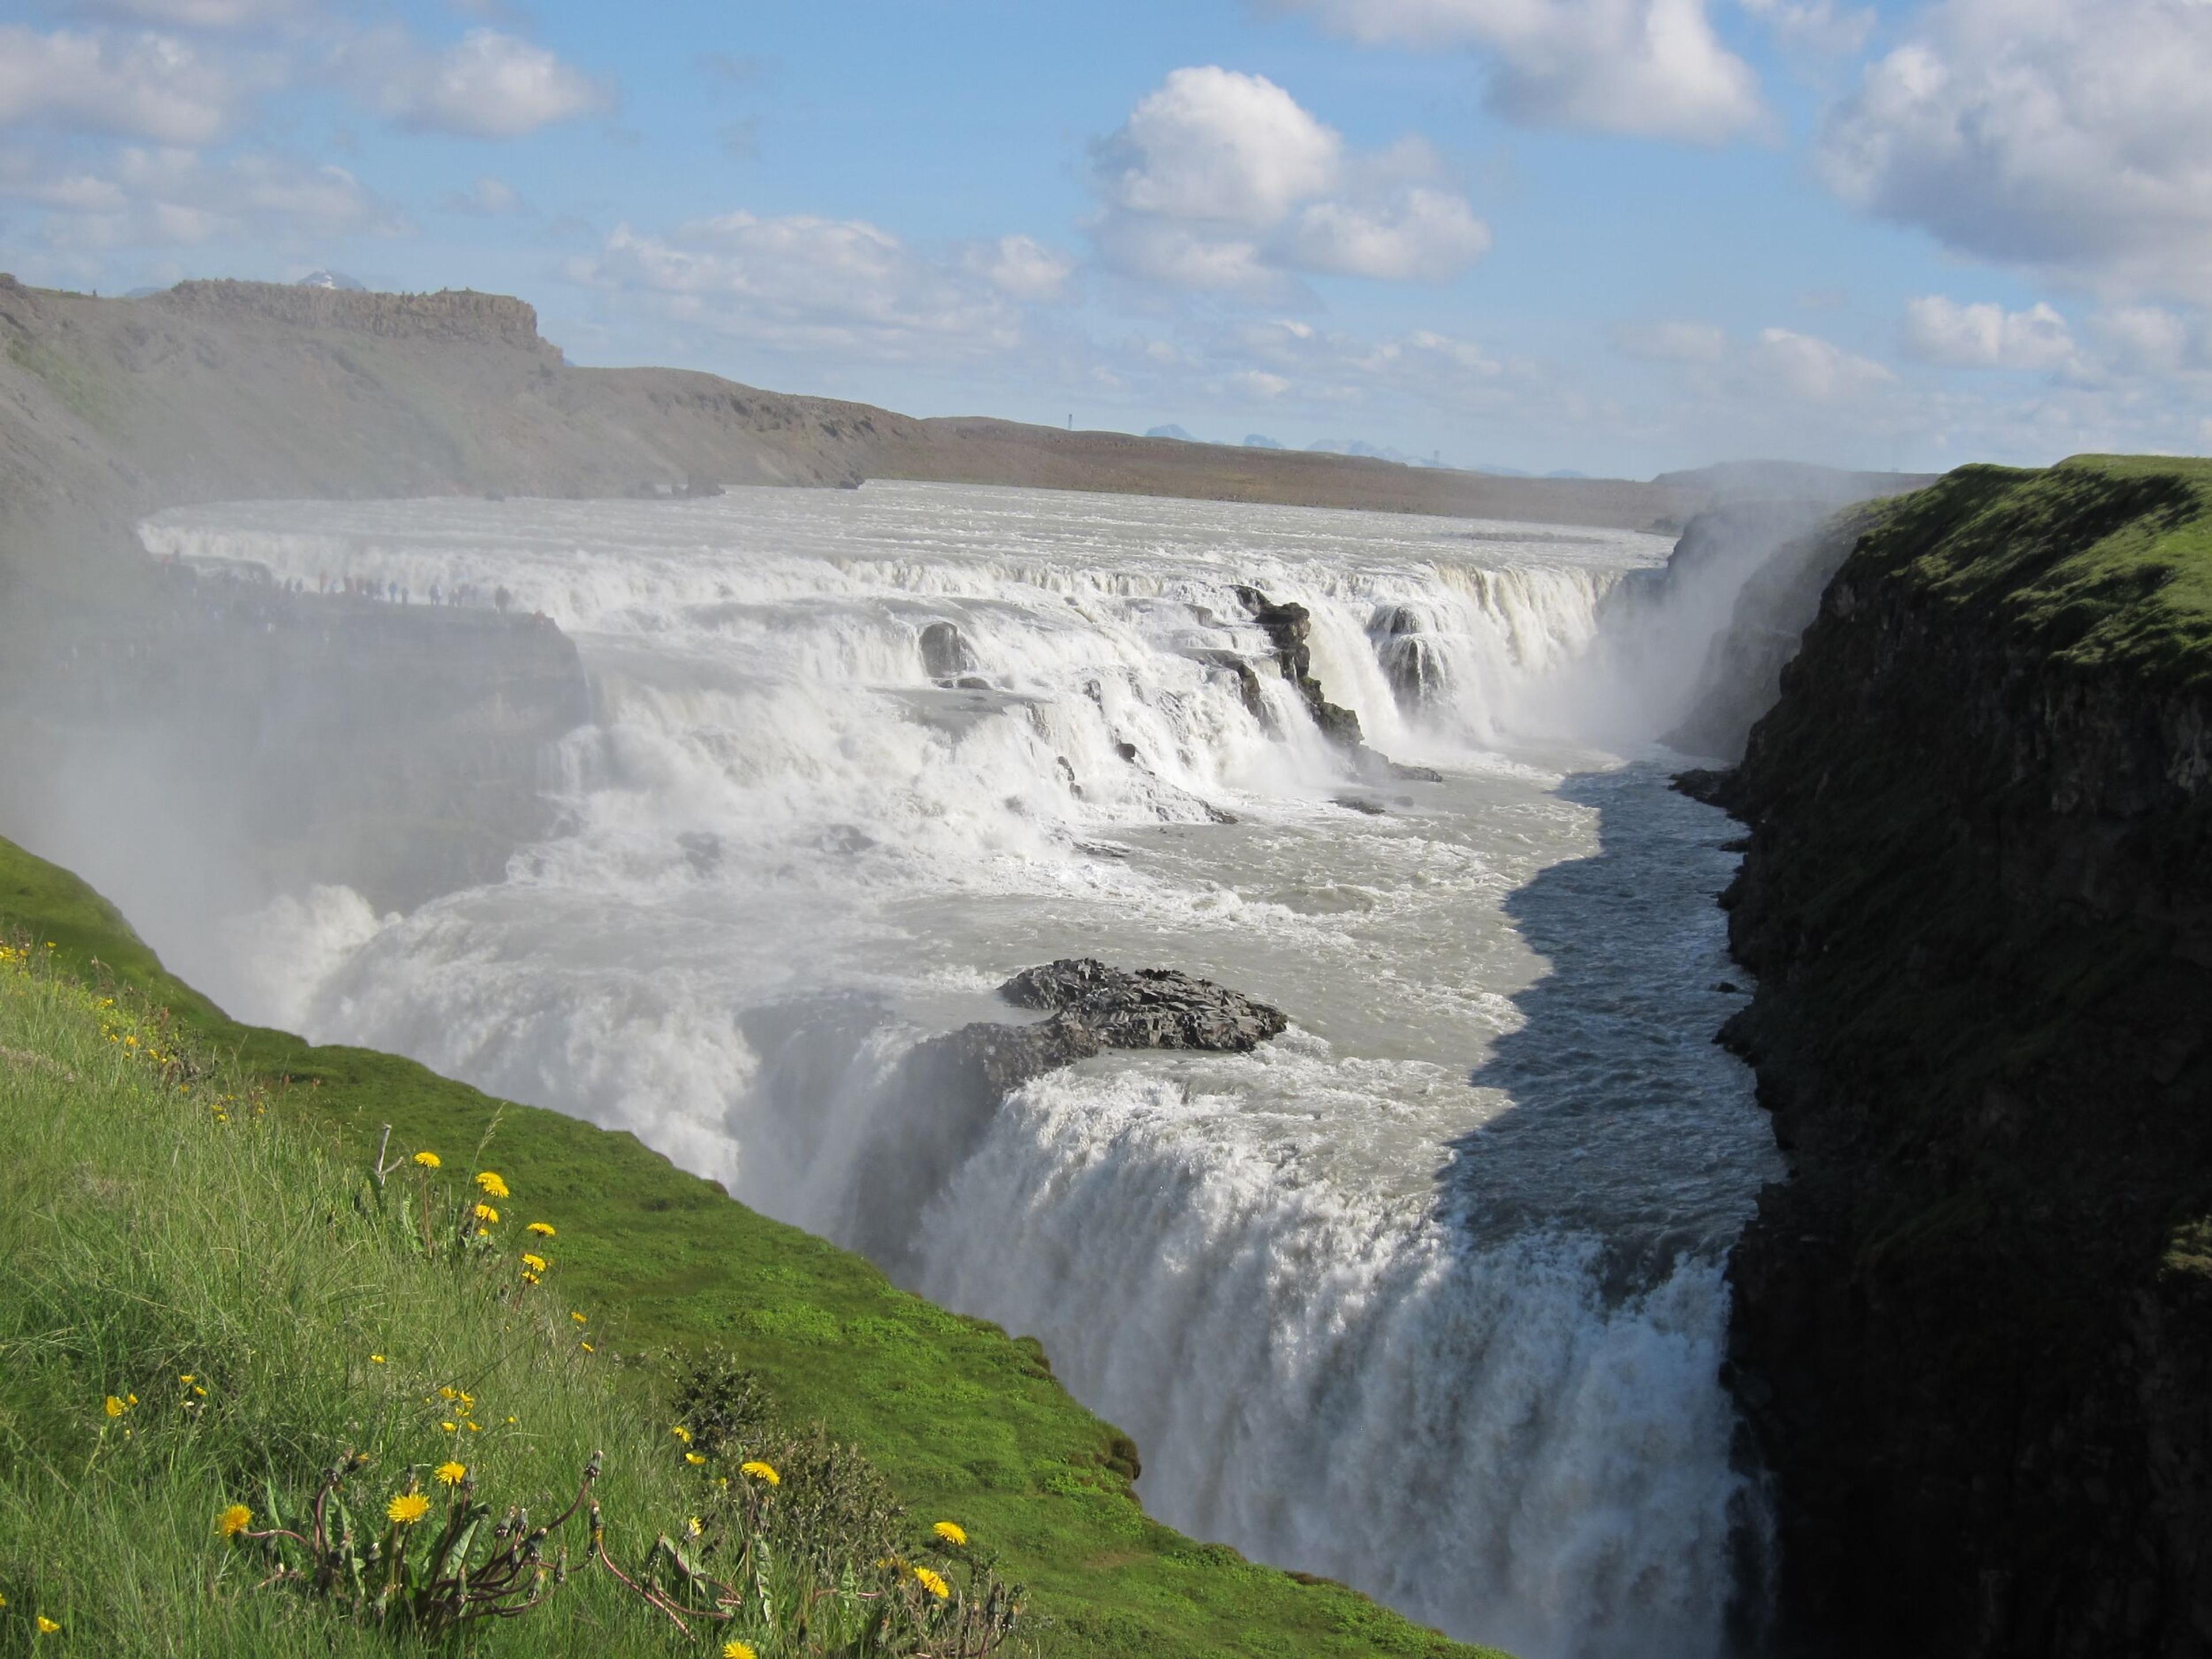 Gullfoss waterfall during summer time. Yellow flowers and grass in the foreground.